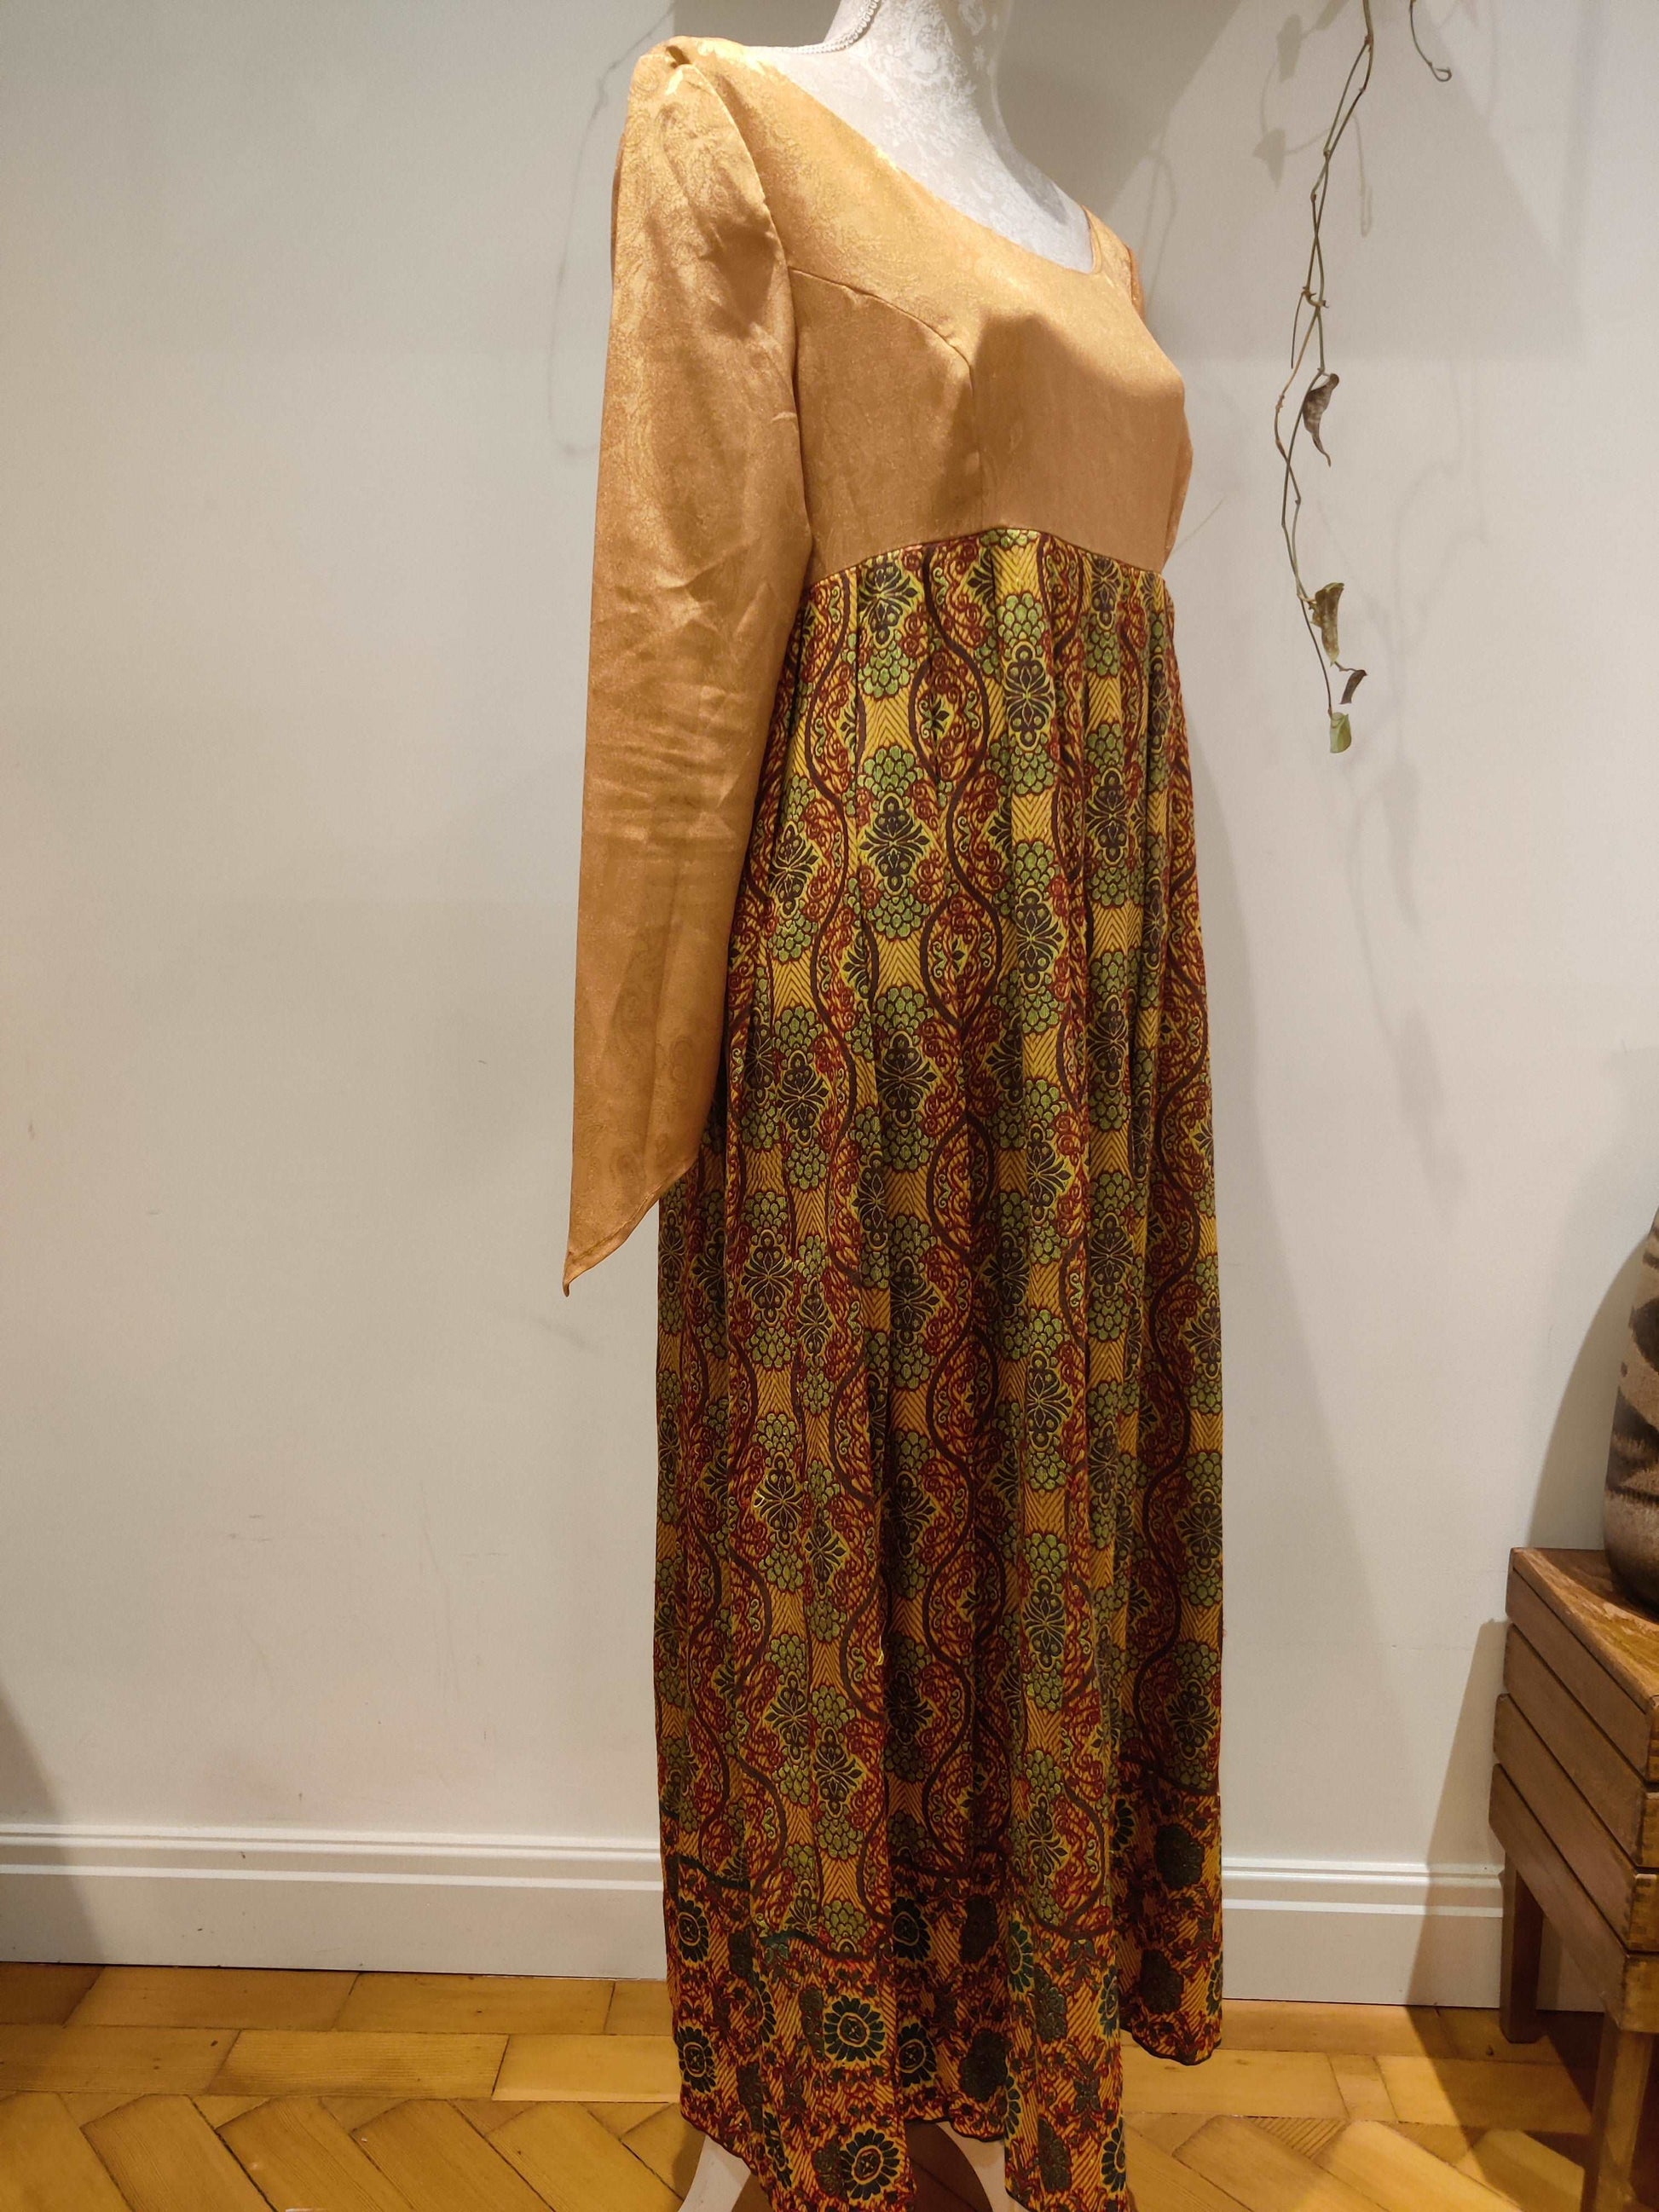 Beautiful maxi dress in gold and vintage print. 